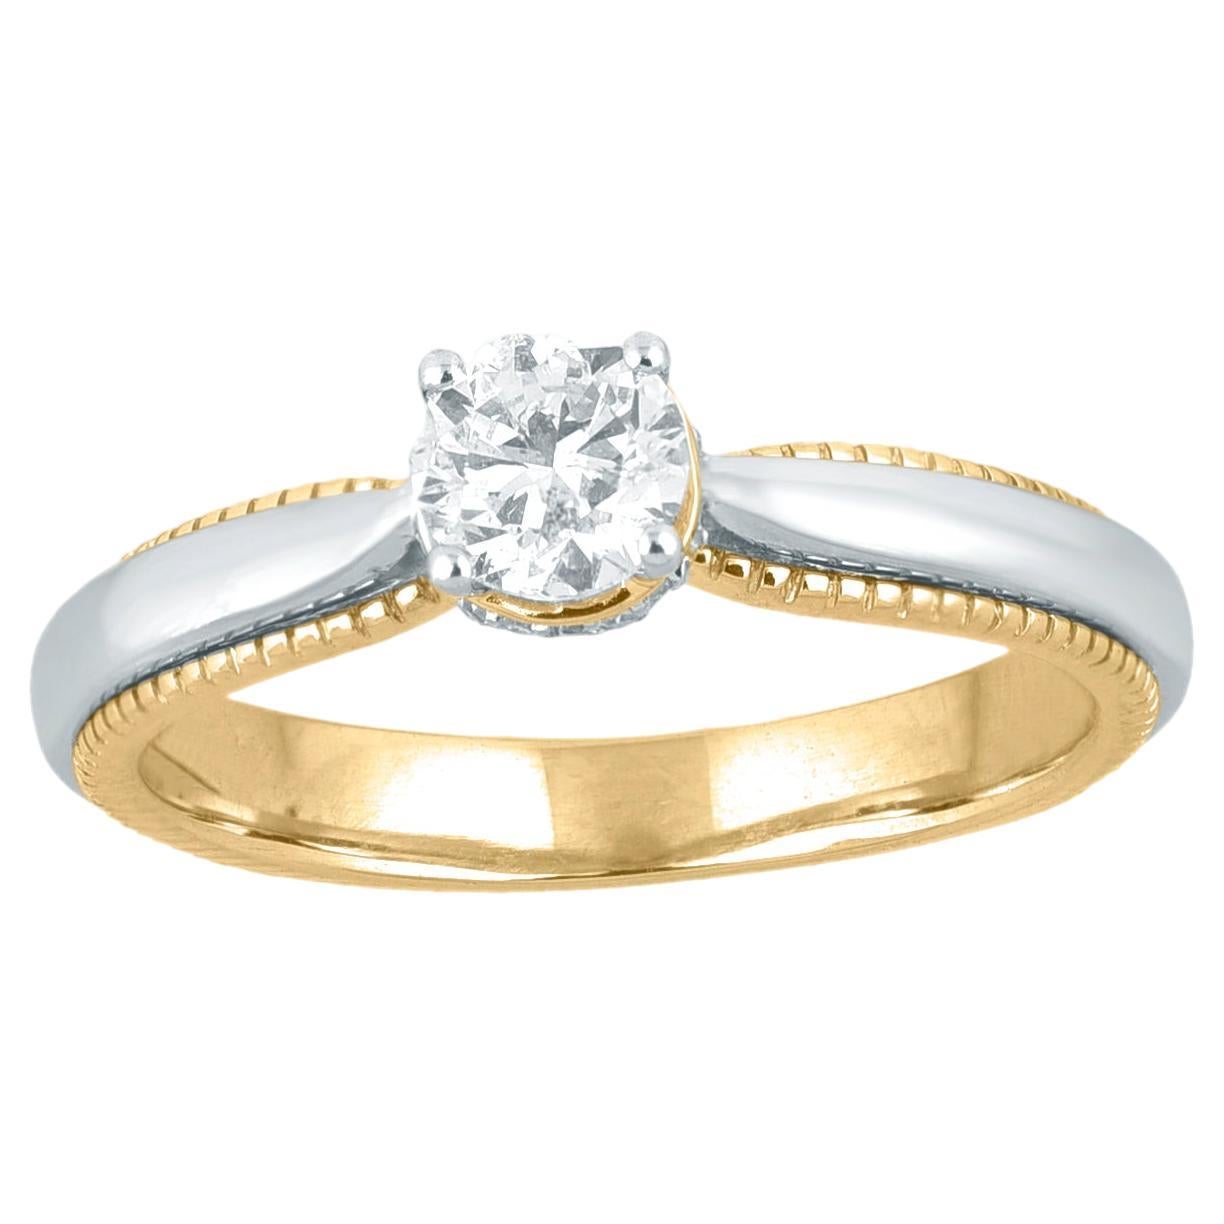 TJD 0.50 Carat Round Diamond 14KT Two-Tone Gold Solitaire Engagement Ring